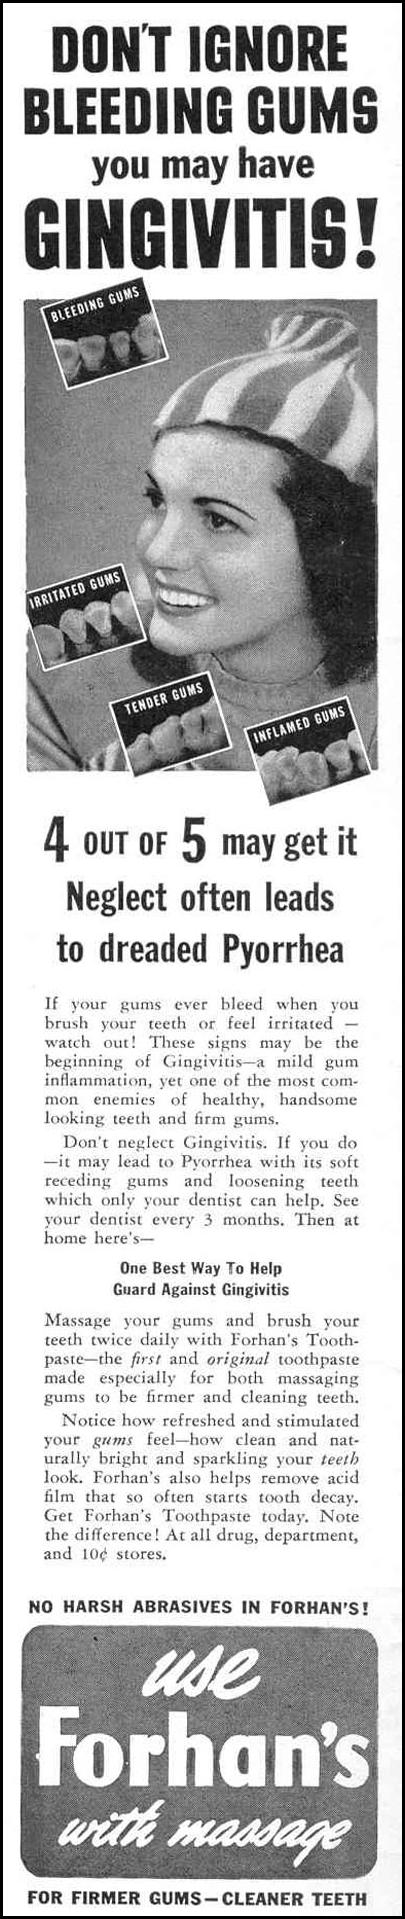 FORHAN'S TOOTHPASTE
LIFE
11/01/1943
p. 4